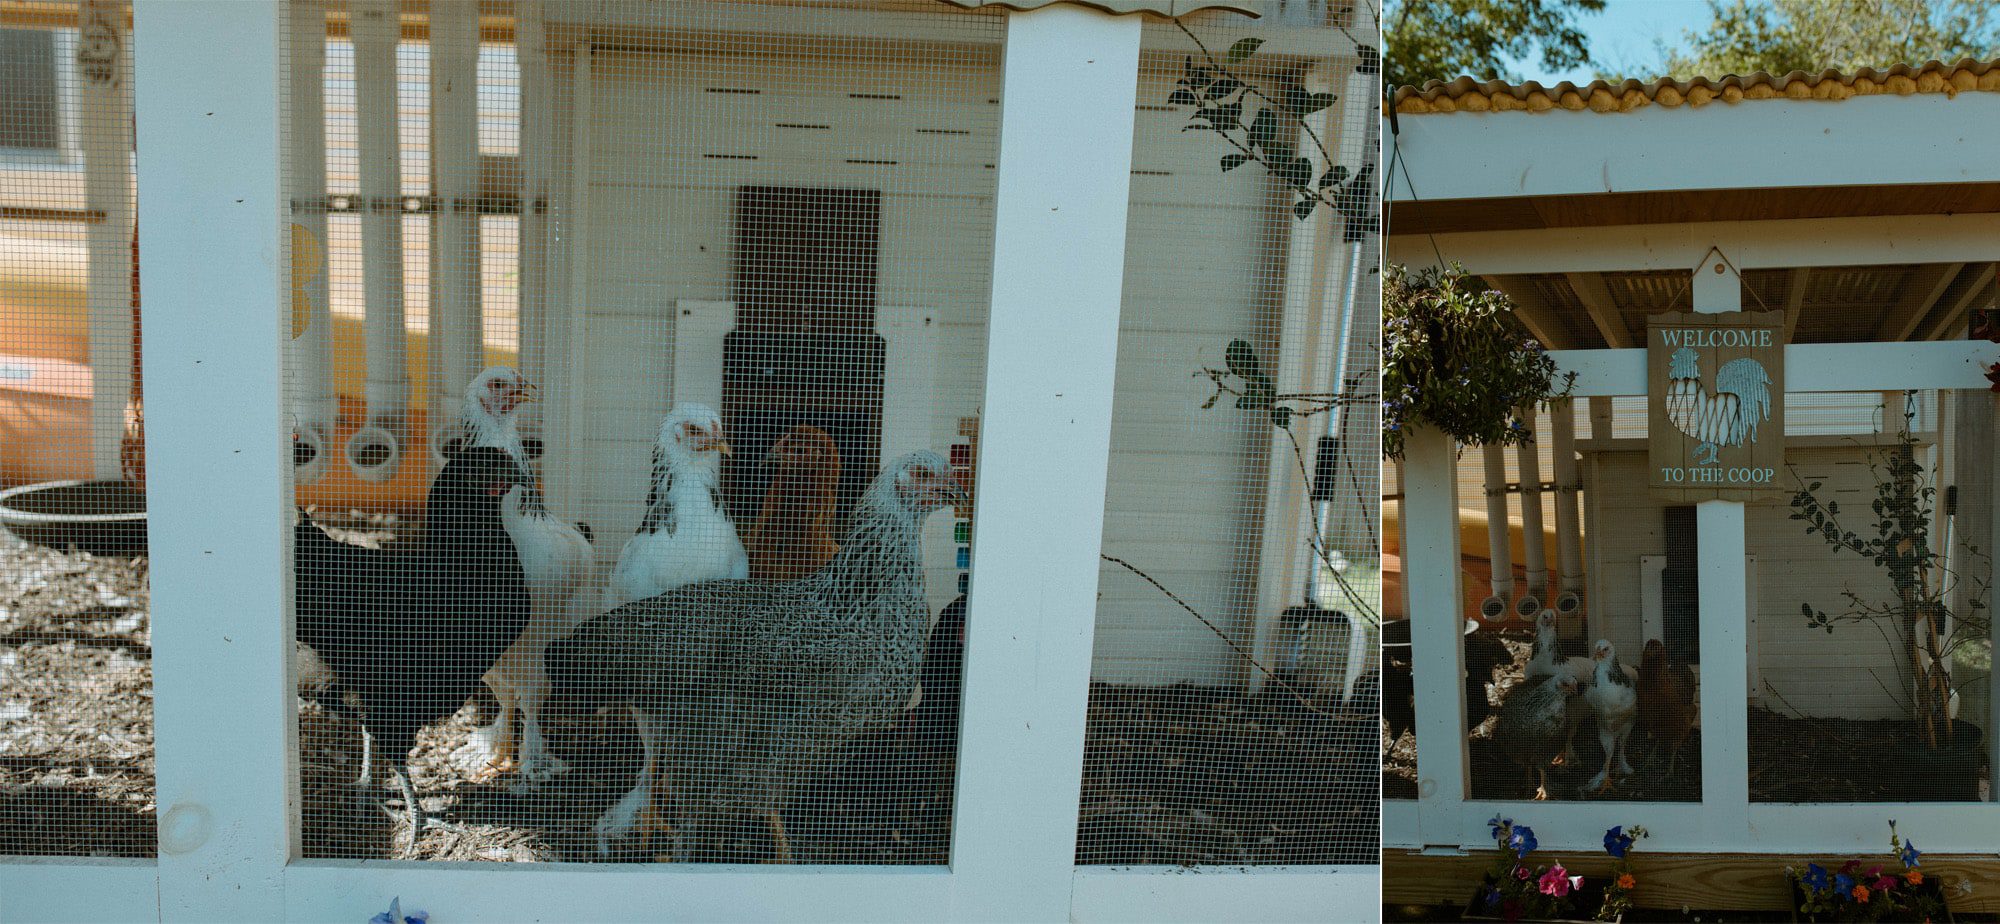 chicken coop at home